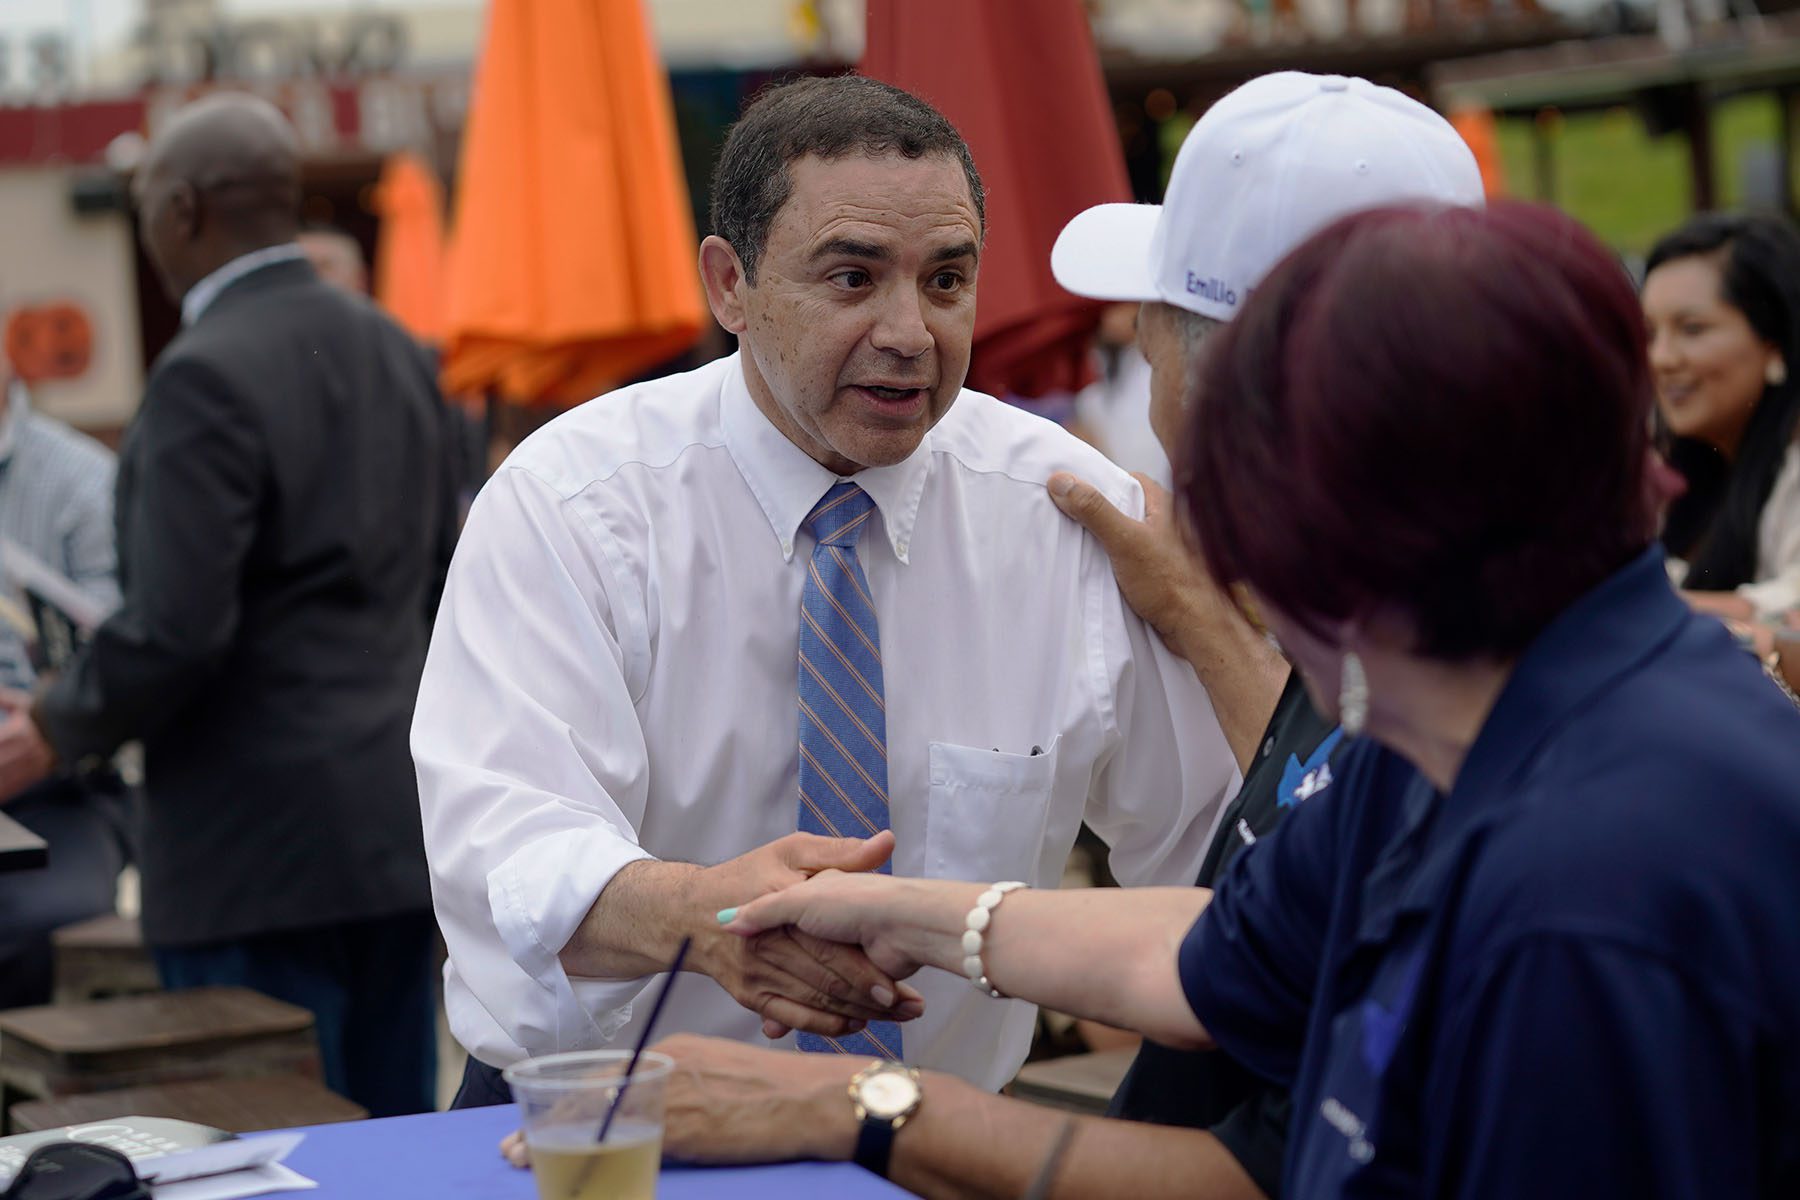 Henry Cuellar shakes a supporters hand at a campaign event.